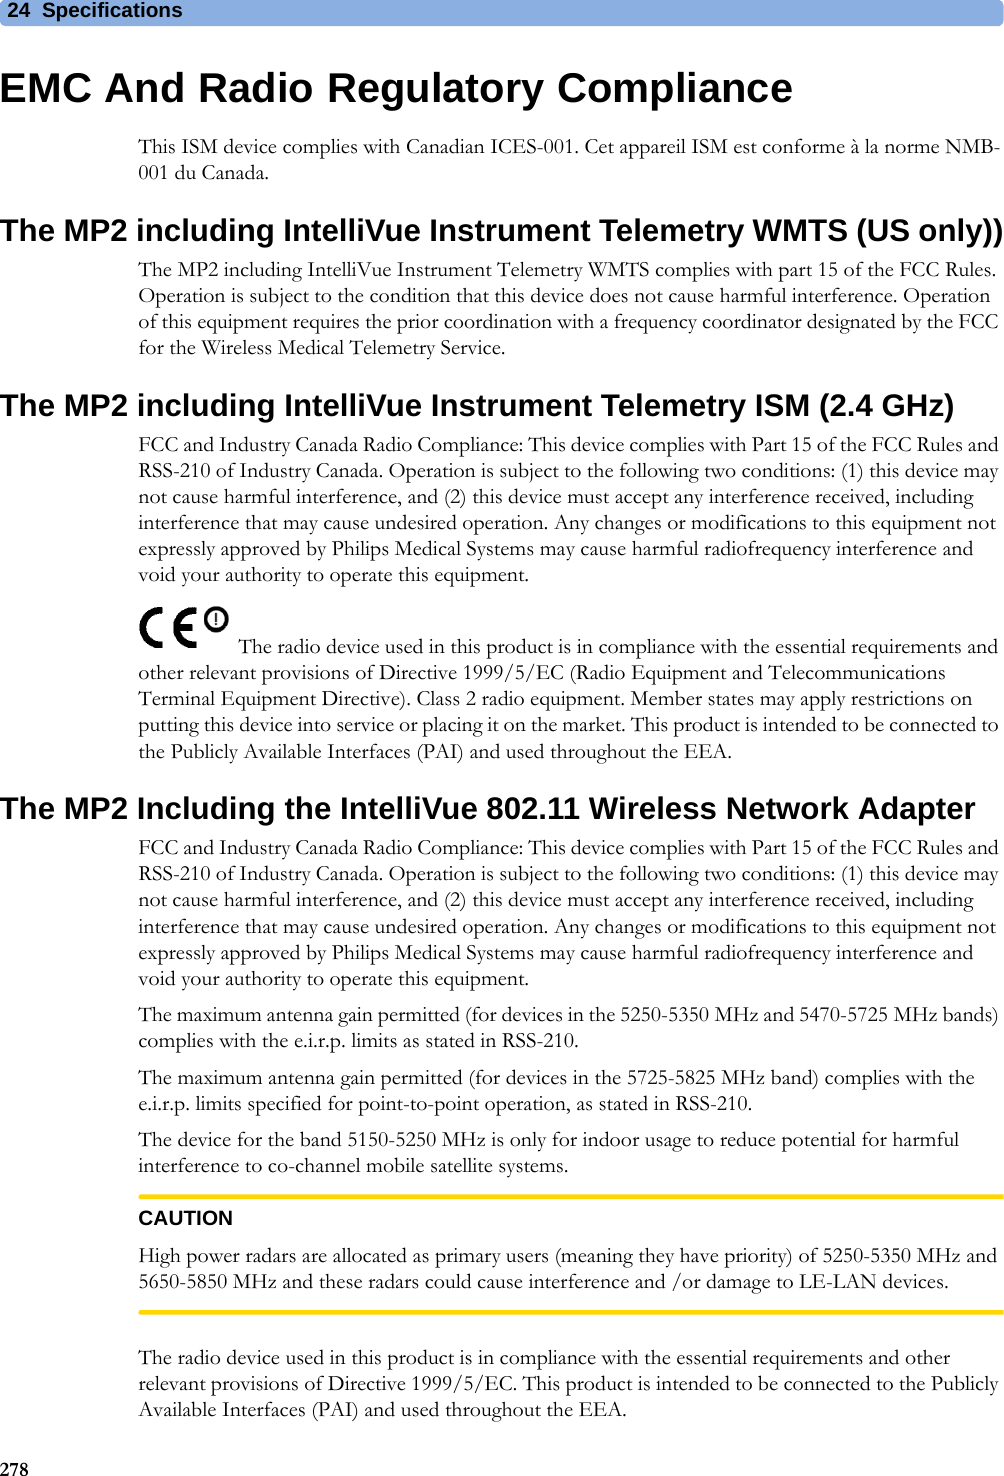 24 Specifications278EMC And Radio Regulatory ComplianceThis ISM device complies with Canadian ICES-001. Cet appareil ISM est conforme à la norme NMB-001 du Canada.The MP2 including IntelliVue Instrument Telemetry WMTS (US only))The MP2 including IntelliVue Instrument Telemetry WMTS complies with part 15 of the FCC Rules. Operation is subject to the condition that this device does not cause harmful interference. Operation of this equipment requires the prior coordination with a frequency coordinator designated by the FCC for the Wireless Medical Telemetry Service.The MP2 including IntelliVue Instrument Telemetry ISM (2.4 GHz)FCC and Industry Canada Radio Compliance: This device complies with Part 15 of the FCC Rules and RSS-210 of Industry Canada. Operation is subject to the following two conditions: (1) this device may not cause harmful interference, and (2) this device must accept any interference received, including interference that may cause undesired operation. Any changes or modifications to this equipment not expressly approved by Philips Medical Systems may cause harmful radiofrequency interference and void your authority to operate this equipment.The radio device used in this product is in compliance with the essential requirements and other relevant provisions of Directive 1999/5/EC (Radio Equipment and Telecommunications Terminal Equipment Directive). Class 2 radio equipment. Member states may apply restrictions on putting this device into service or placing it on the market. This product is intended to be connected to the Publicly Available Interfaces (PAI) and used throughout the EEA.The MP2 Including the IntelliVue 802.11 Wireless Network AdapterFCC and Industry Canada Radio Compliance: This device complies with Part 15 of the FCC Rules and RSS-210 of Industry Canada. Operation is subject to the following two conditions: (1) this device may not cause harmful interference, and (2) this device must accept any interference received, including interference that may cause undesired operation. Any changes or modifications to this equipment not expressly approved by Philips Medical Systems may cause harmful radiofrequency interference and void your authority to operate this equipment.The maximum antenna gain permitted (for devices in the 5250-5350 MHz and 5470-5725 MHz bands) complies with the e.i.r.p. limits as stated in RSS-210.The maximum antenna gain permitted (for devices in the 5725-5825 MHz band) complies with the e.i.r.p. limits specified for point-to-point operation, as stated in RSS-210.The device for the band 5150-5250 MHz is only for indoor usage to reduce potential for harmful interference to co-channel mobile satellite systems.CAUTIONHigh power radars are allocated as primary users (meaning they have priority) of 5250-5350 MHz and 5650-5850 MHz and these radars could cause interference and /or damage to LE-LAN devices.The radio device used in this product is in compliance with the essential requirements and other relevant provisions of Directive 1999/5/EC. This product is intended to be connected to the Publicly Available Interfaces (PAI) and used throughout the EEA.